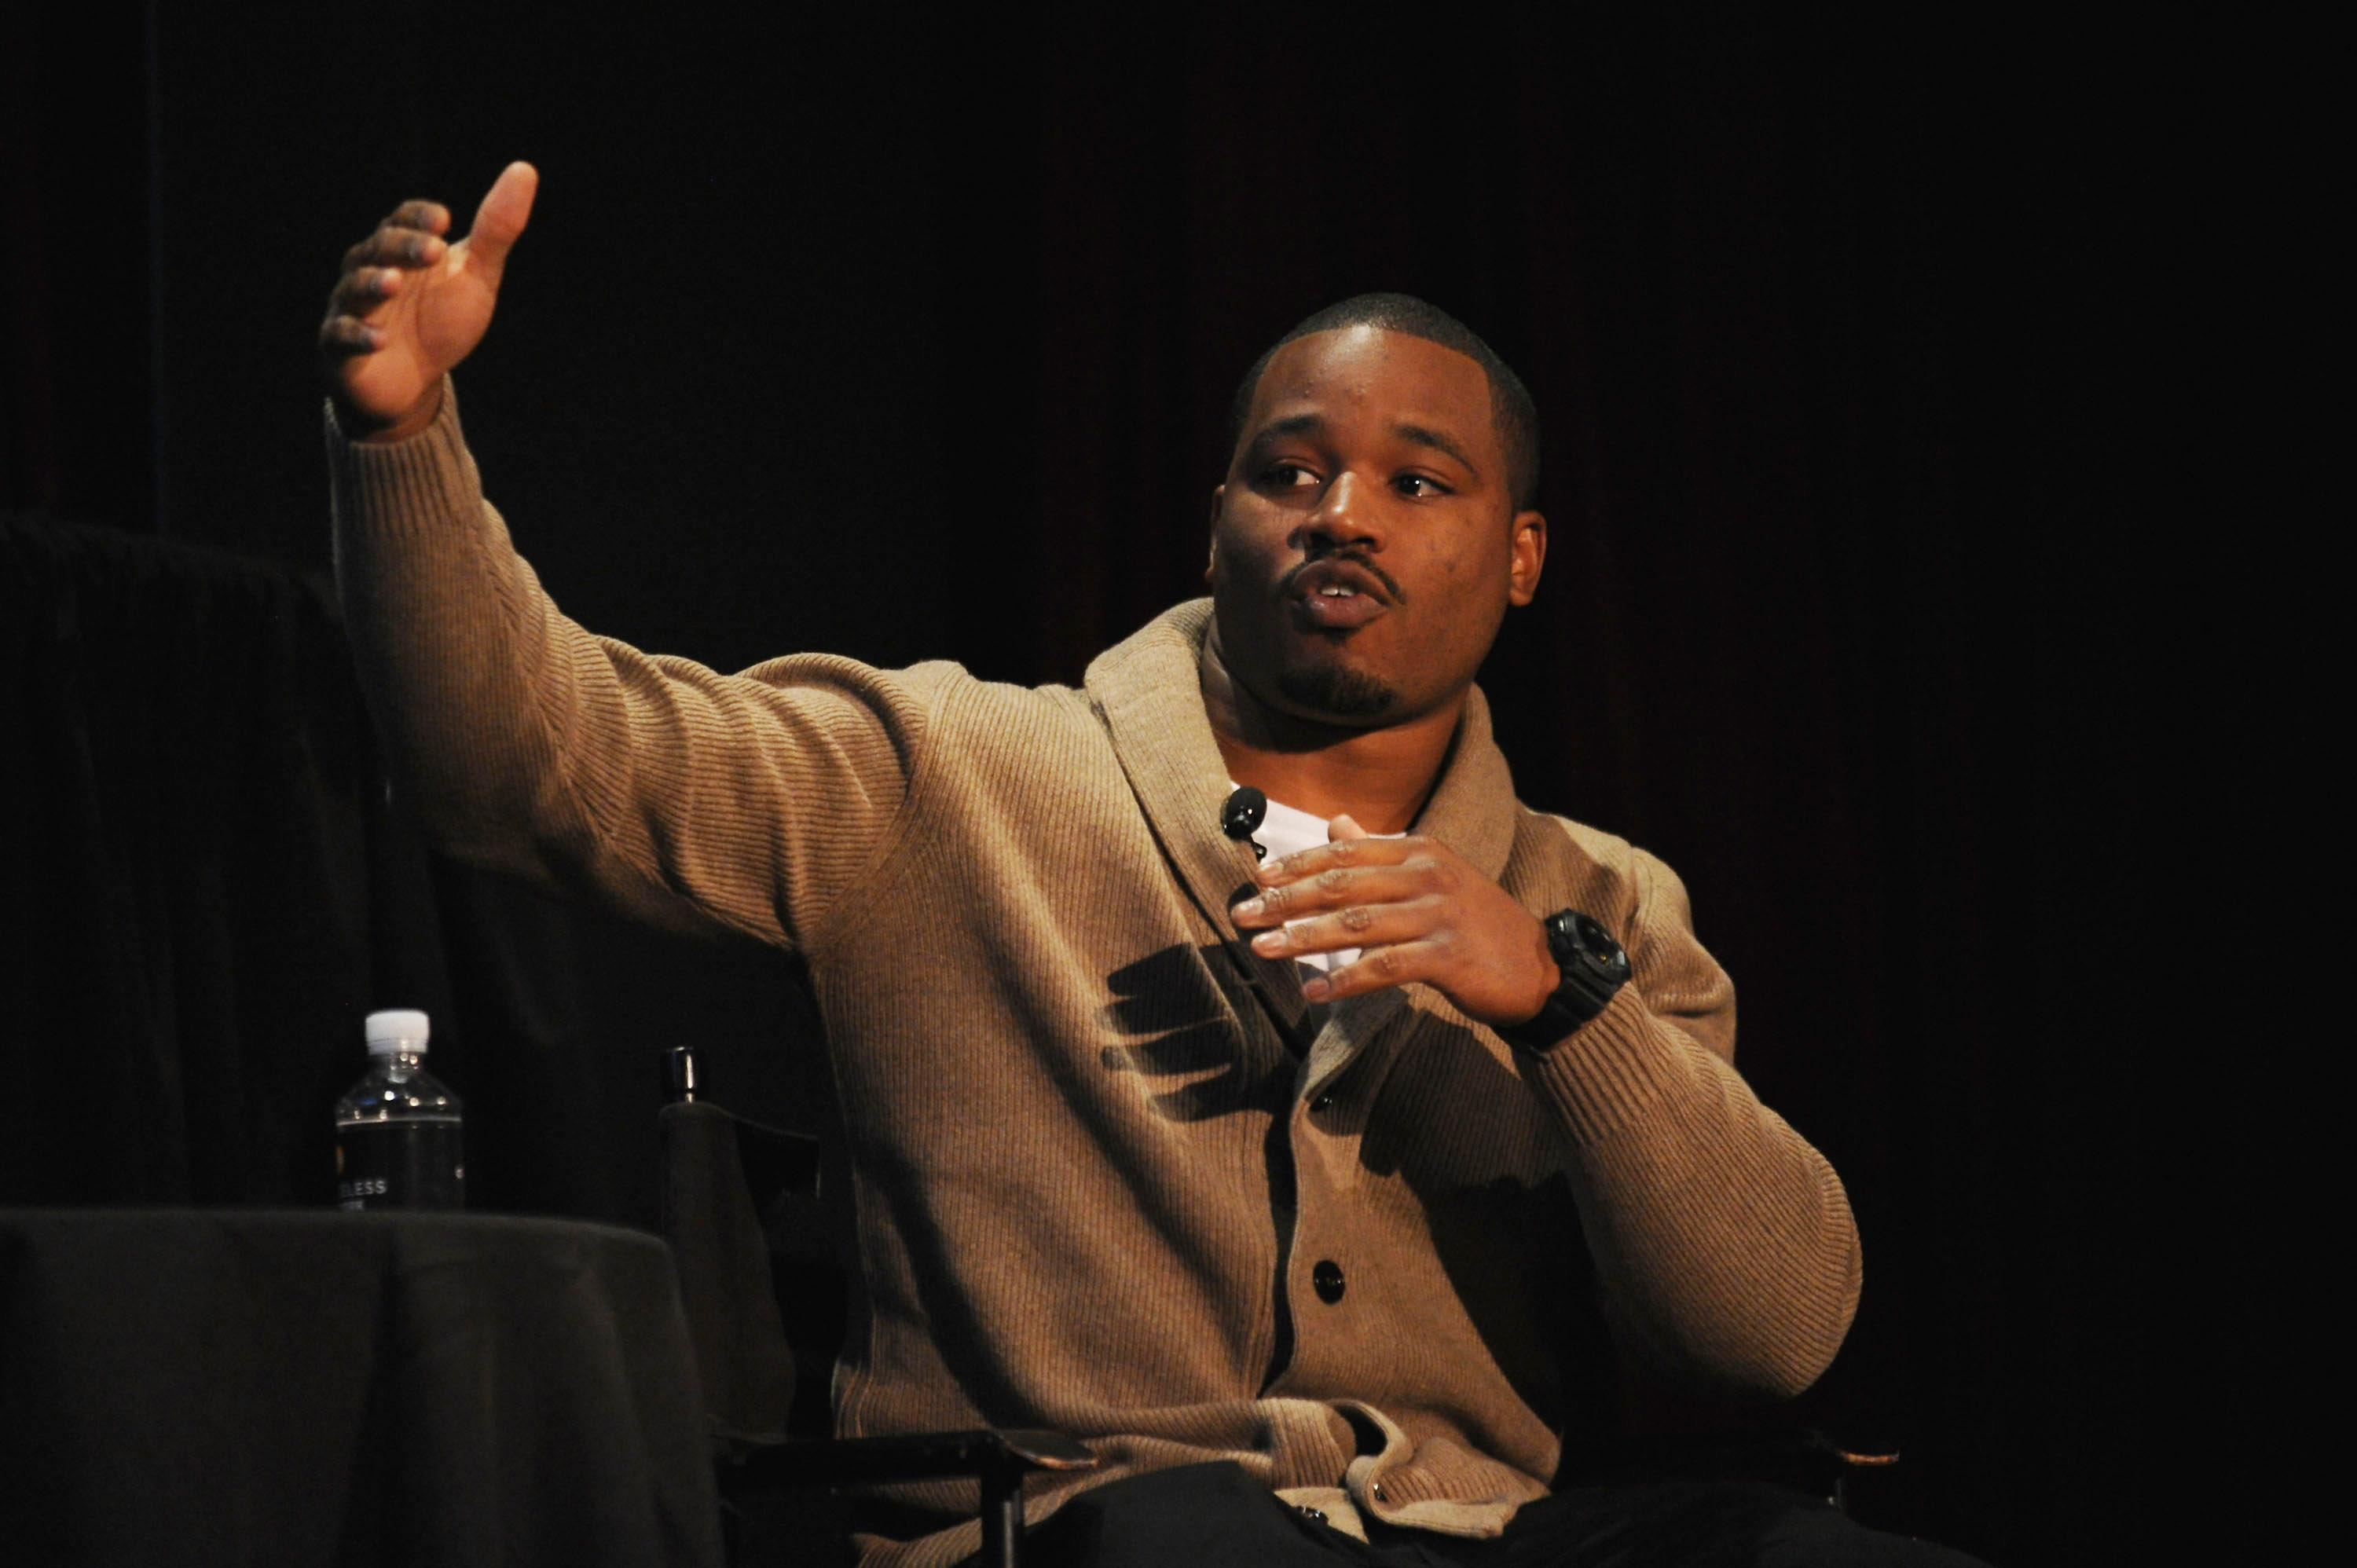 Ryan Coogler speaks at a forum, with his right arm extended up and out